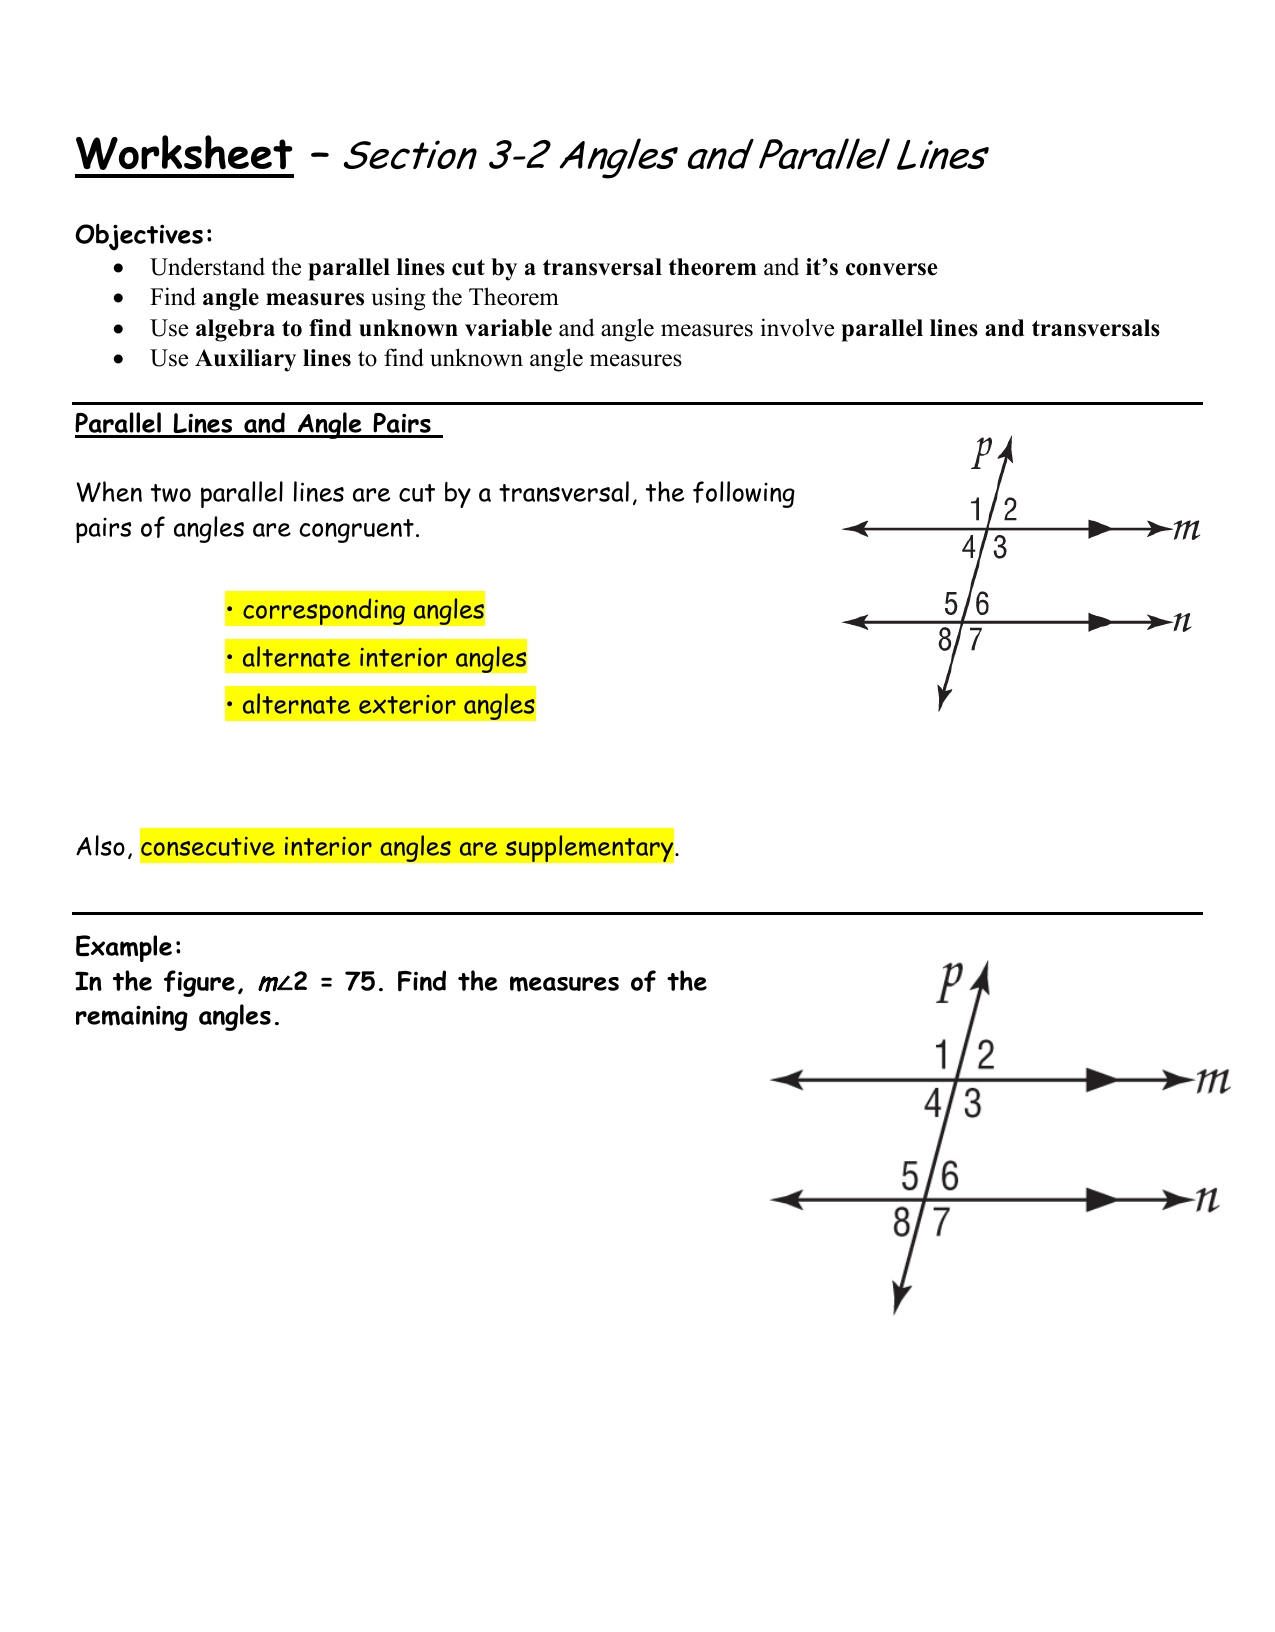 Worksheet Section 21 Angles and Parallel Lines In Parallel Lines And Transversals Worksheet